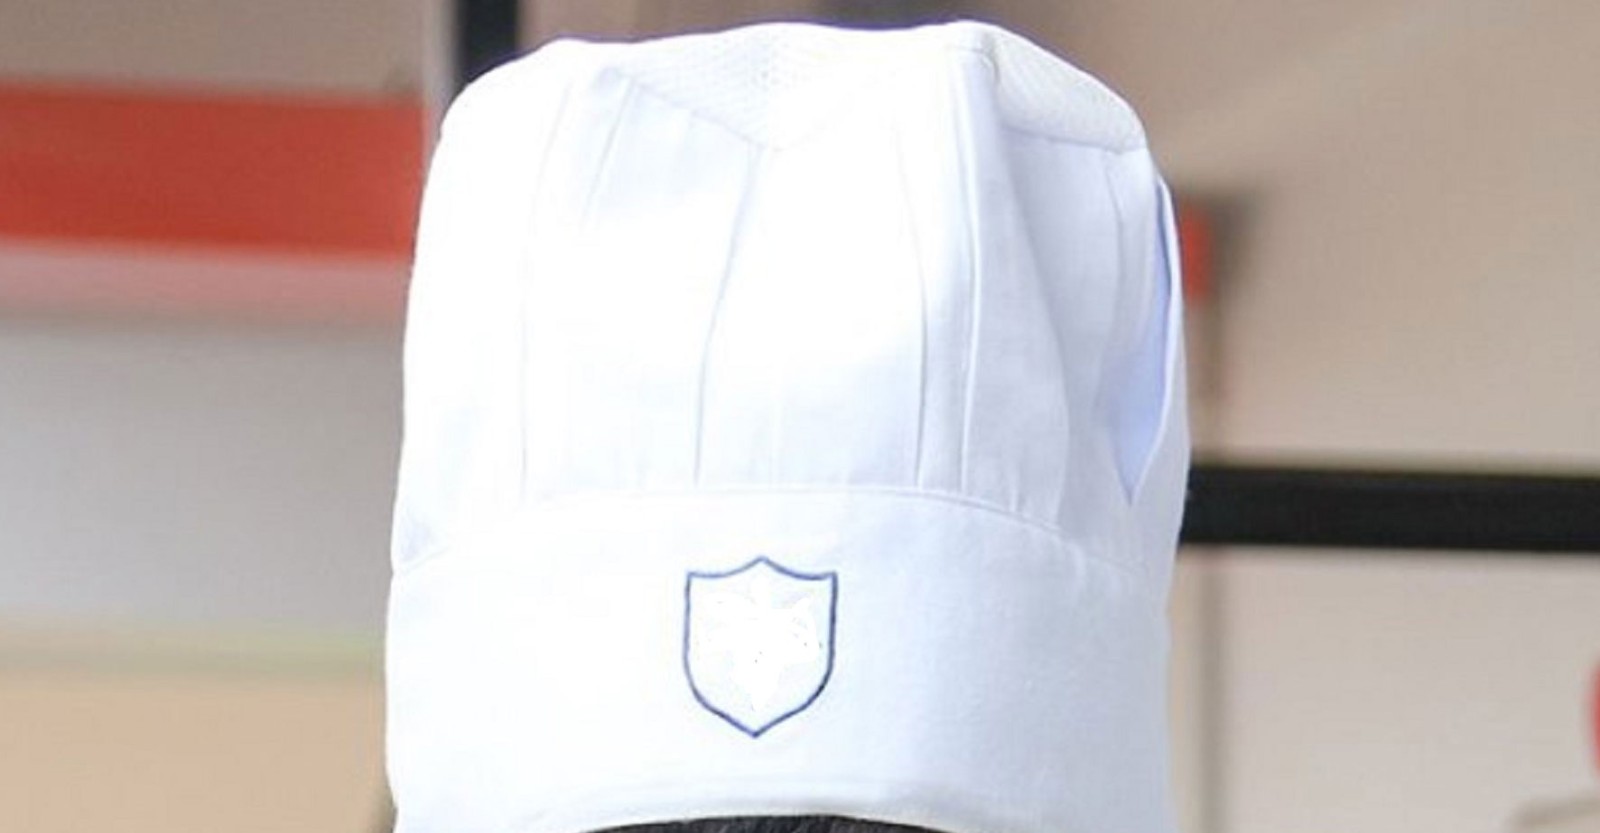 A chef's hat